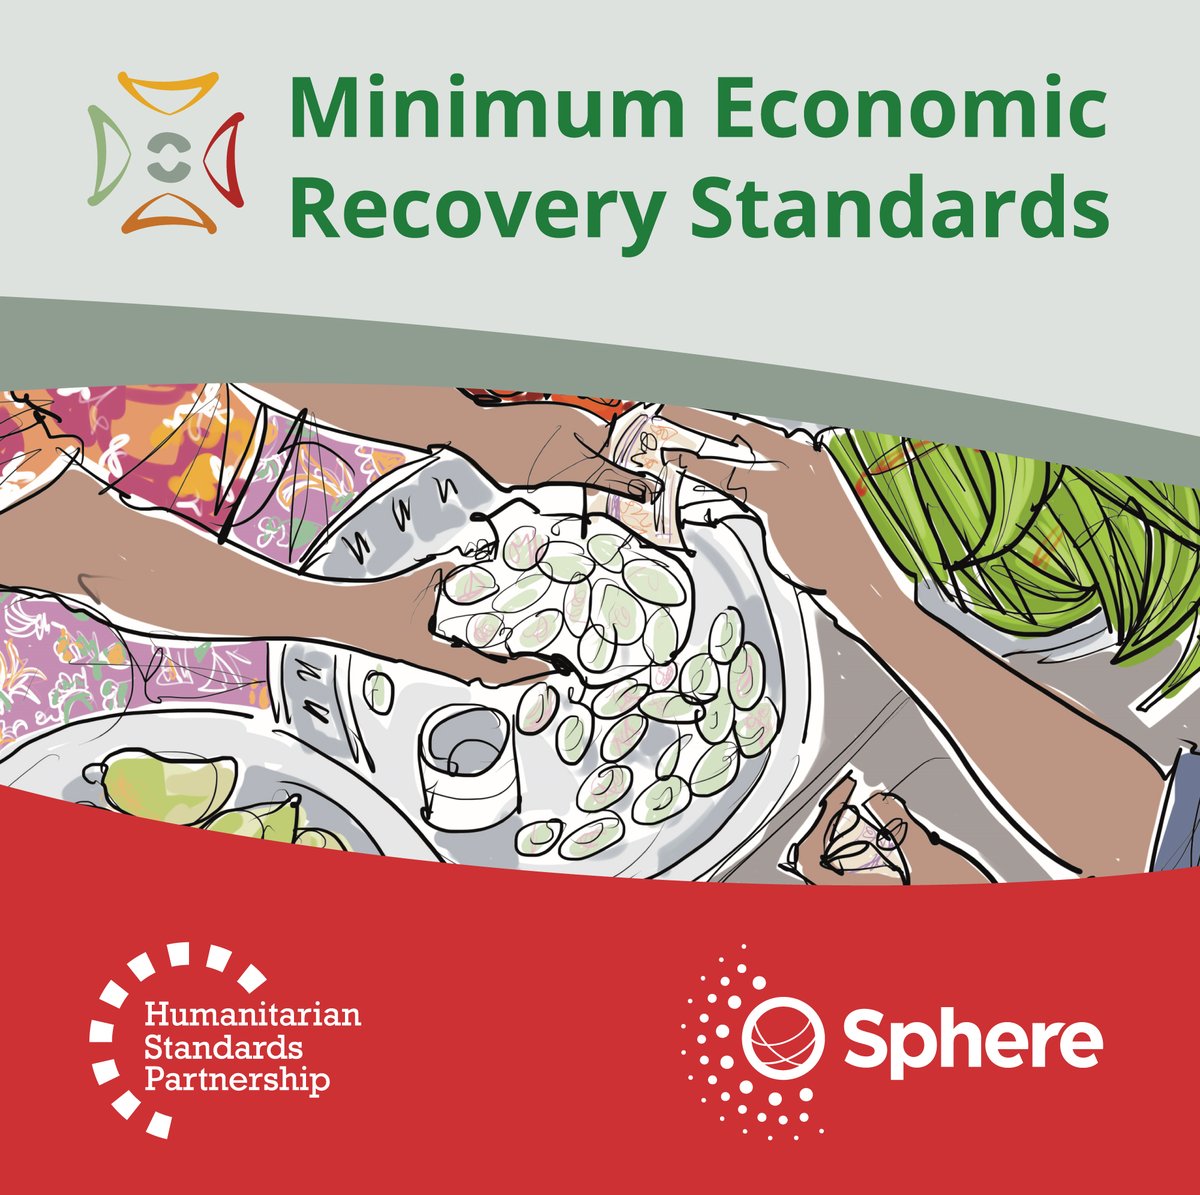 Big news for global #HumanitarianStandards: the well-known Minimum Economic Recovery Standards (MERS) has a new home in the Sphere network and remains in the Humanitarian Standards Partnership (HSP). Read more: spherestandards.org/mers-now-led-b…